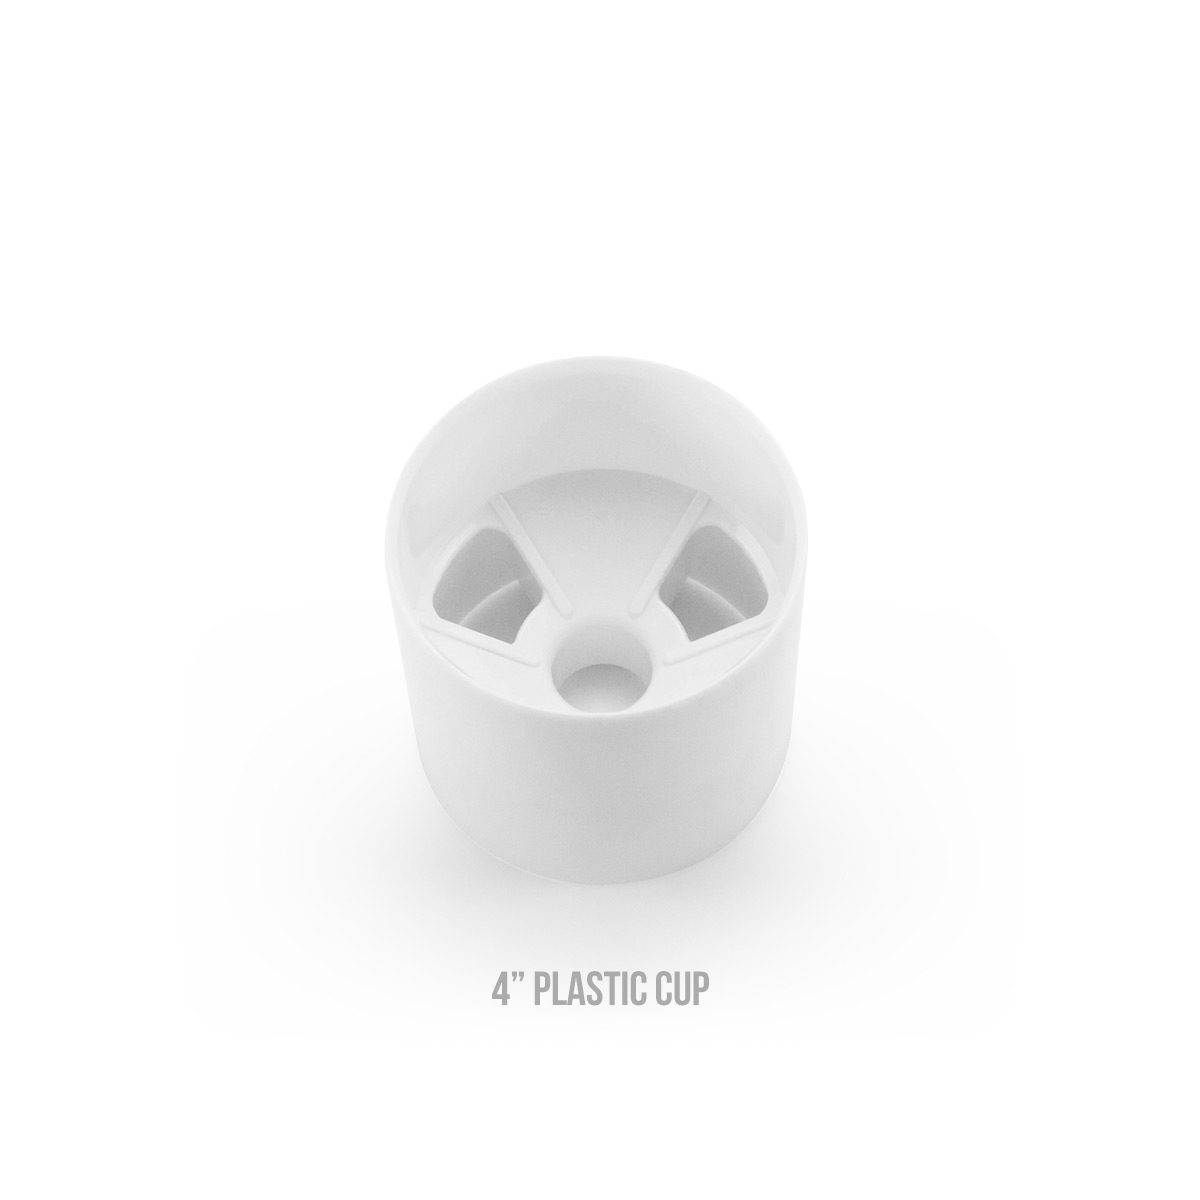 4 inch plastic cup